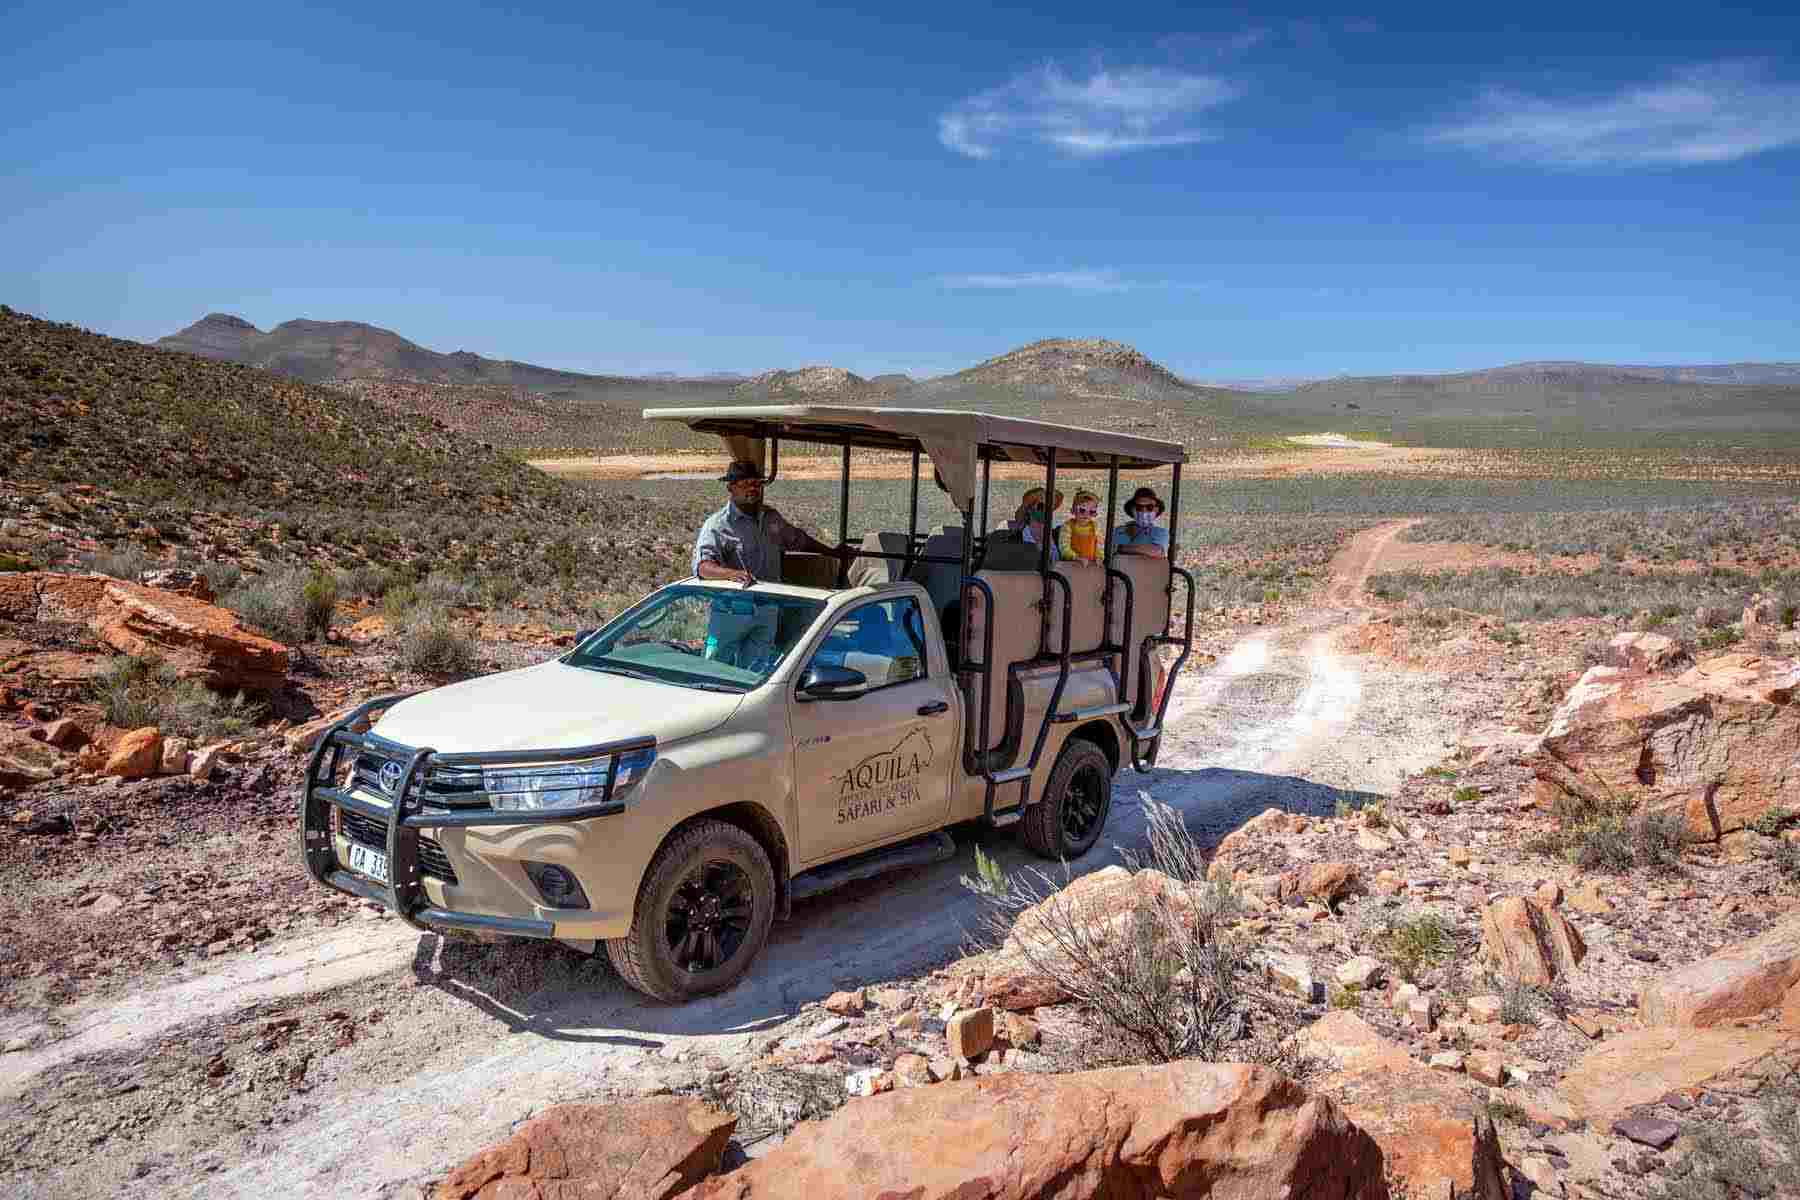 aquila private drive vehicle driving along a rocky Karoo dirt road, shown as part of Aquila's "about us" initiative.